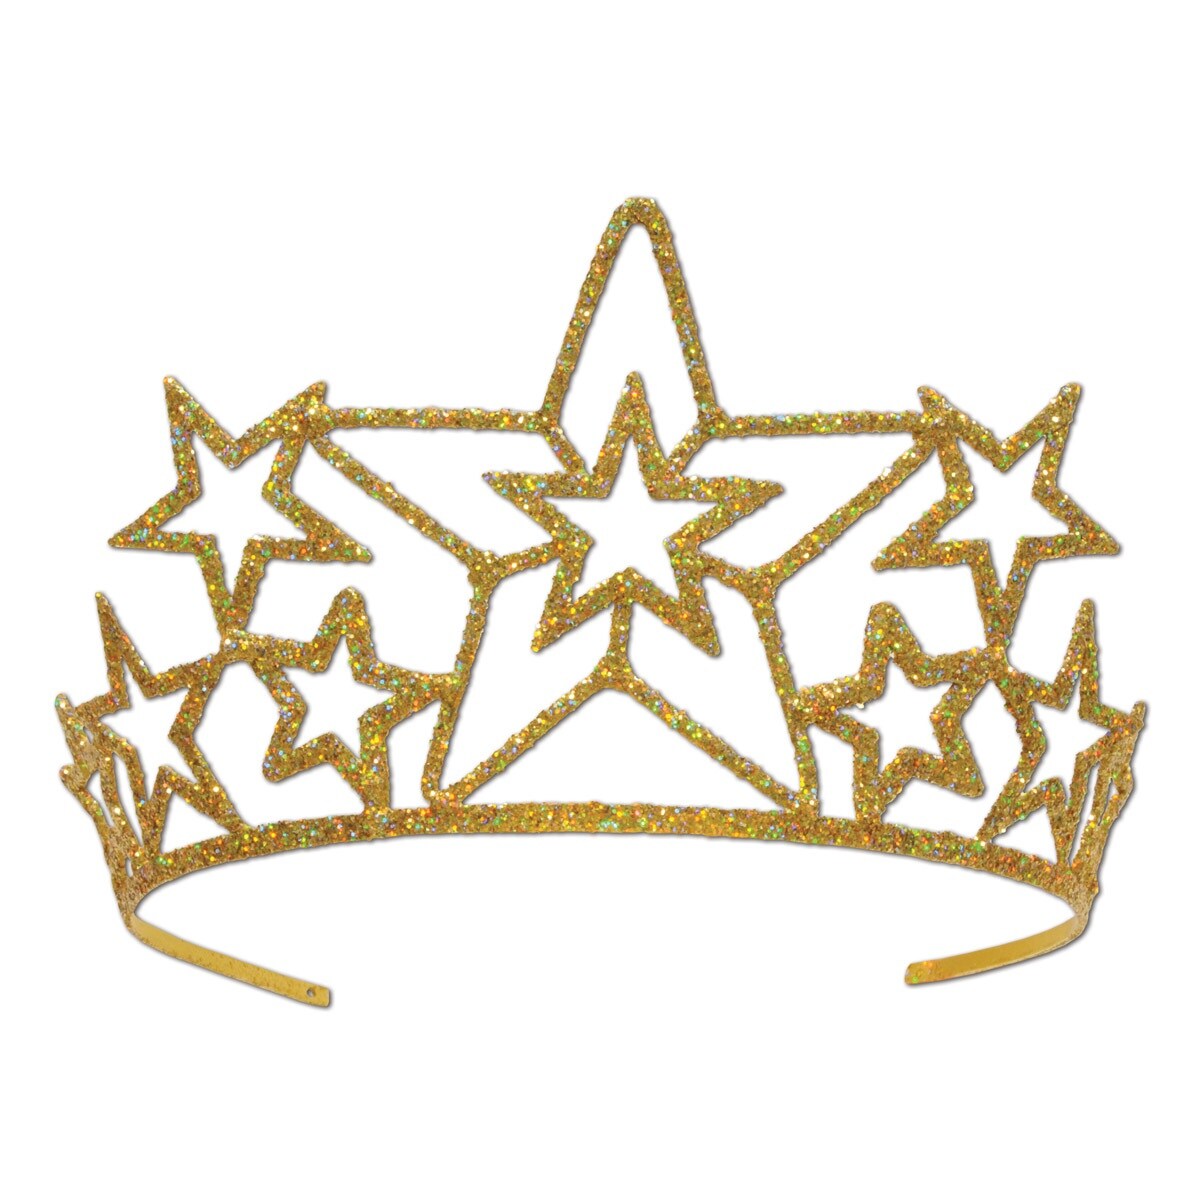 Party Central Club Pack of 6 Glittered Star Women Adult Tiara Costume Accessories - One Size